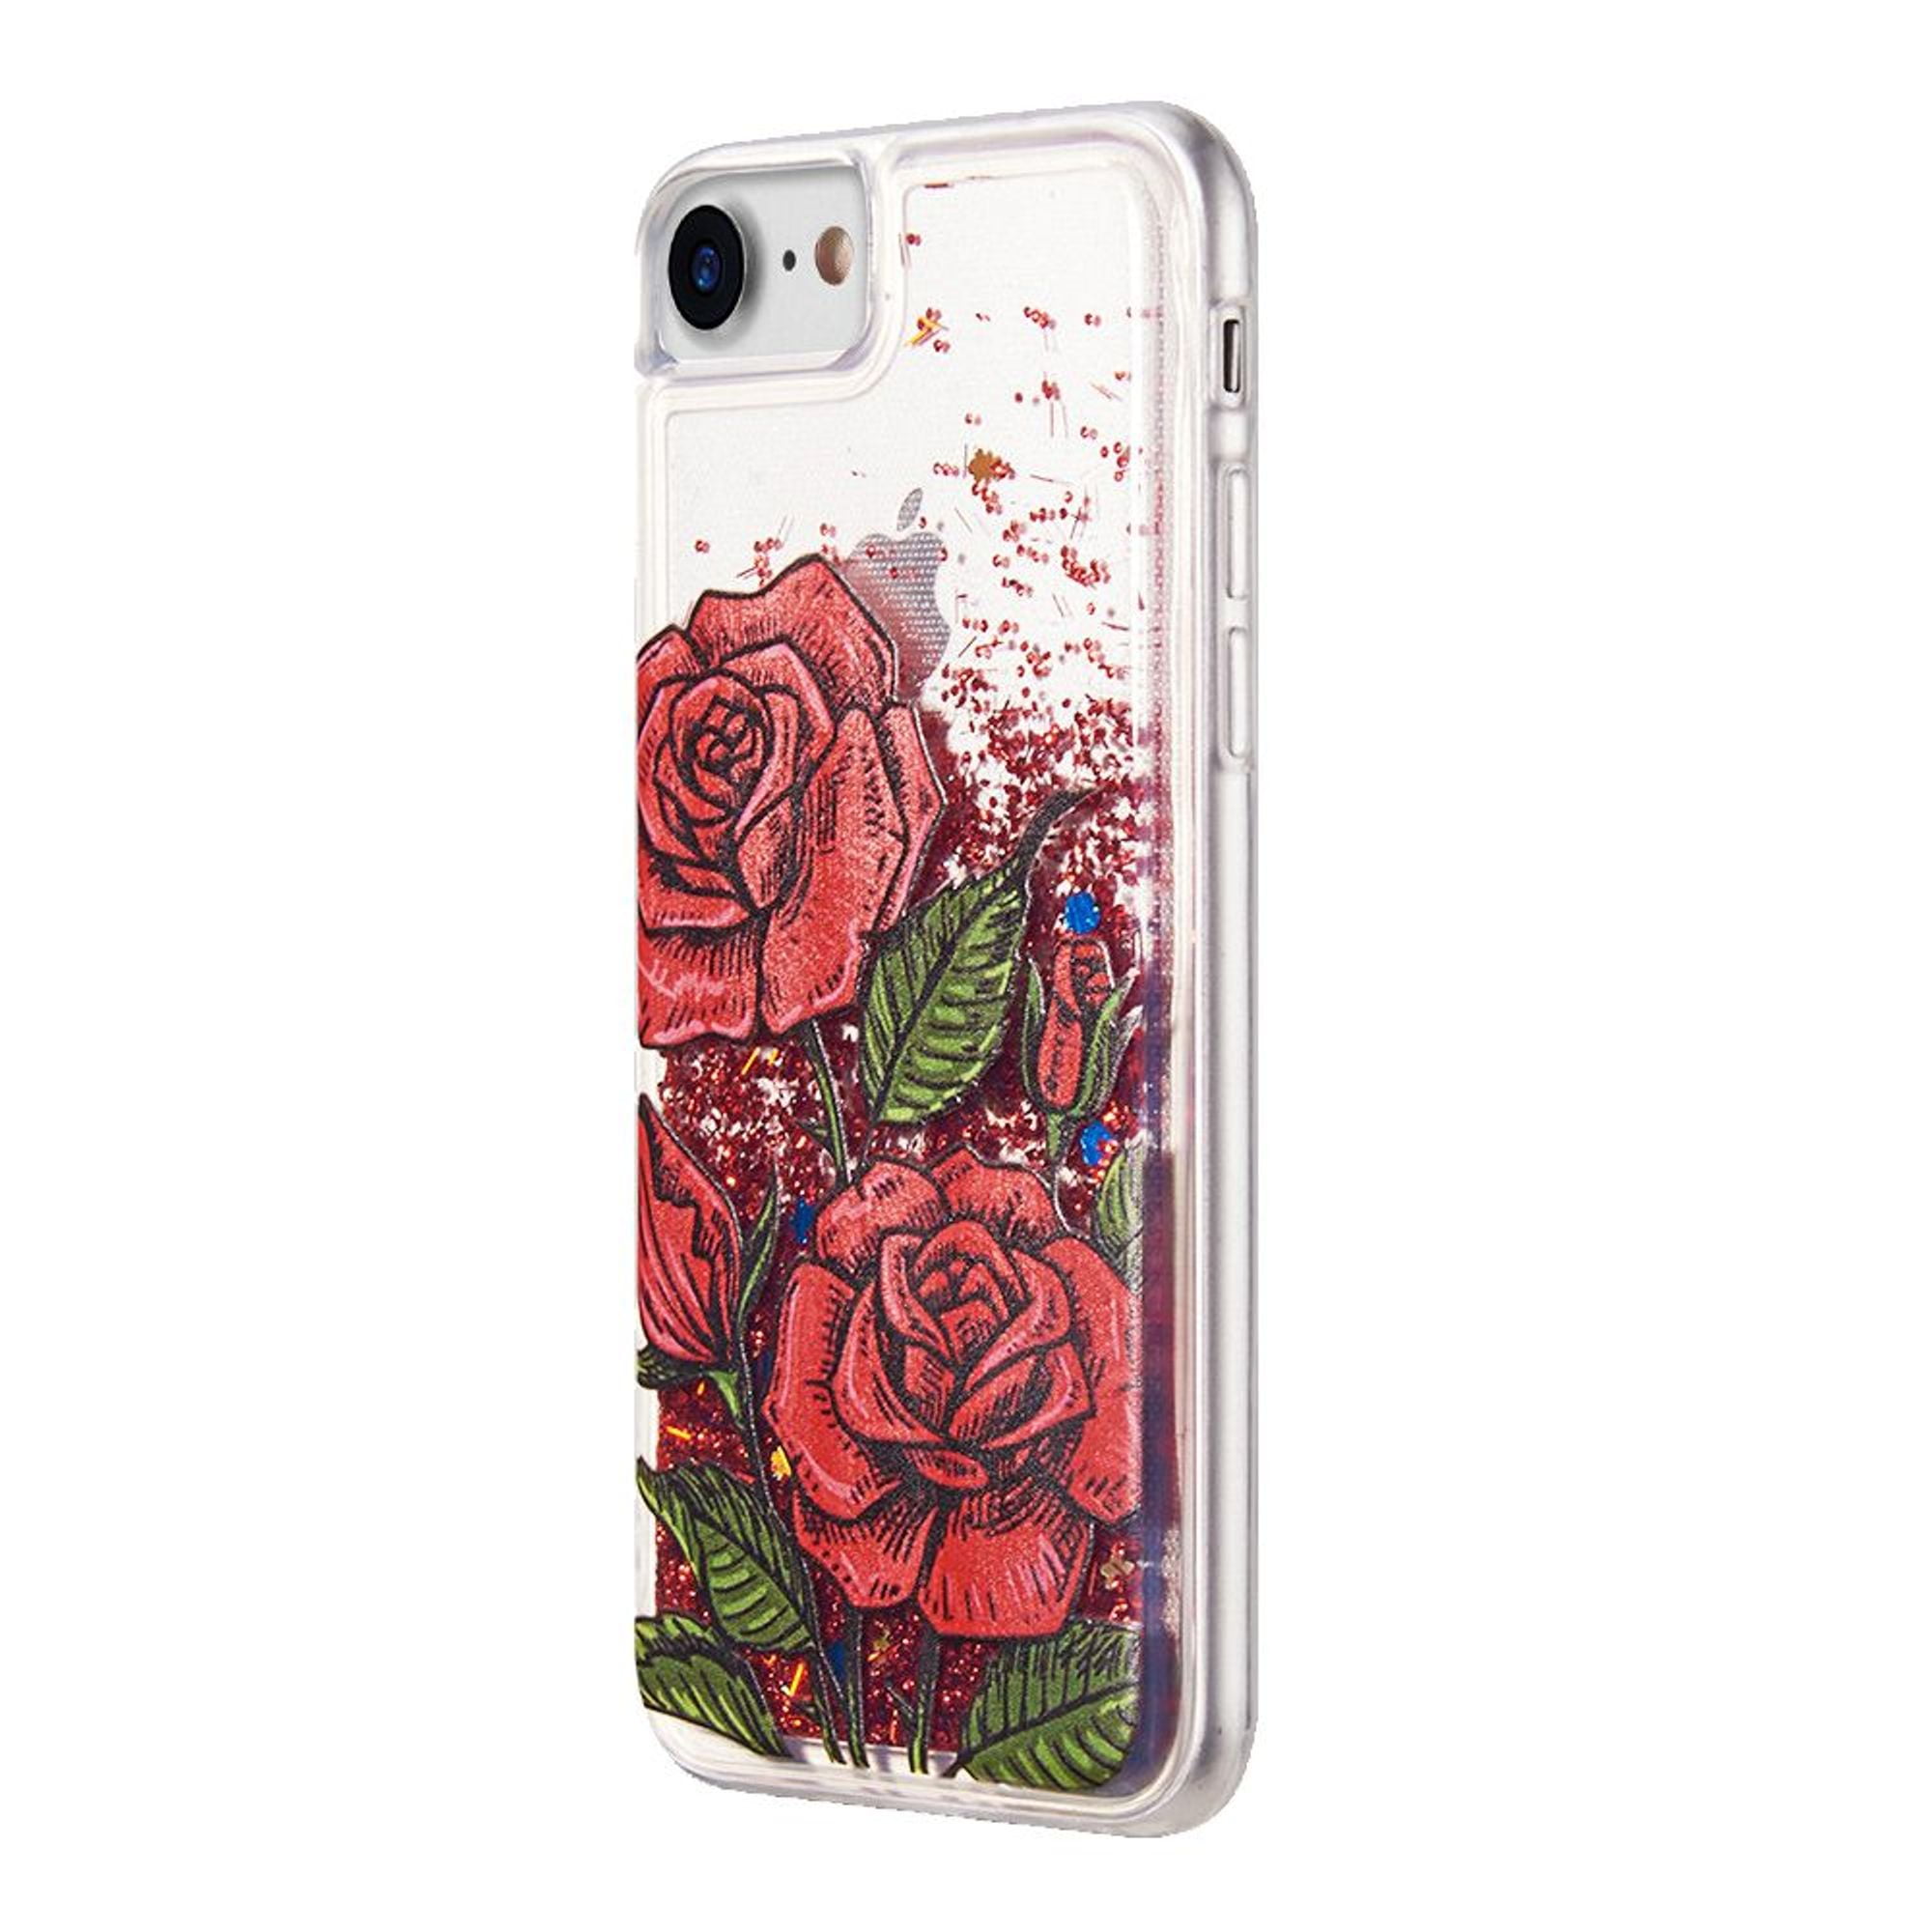 For Iphone Se Se2 Case By Insten Waterall Liquid Sparkling Quicksand Roses Tpu Rubber Candy Skin Case Cover Compatible With Apple Iphone Se Se2 7 8 Red Walmart Com Walmart Com